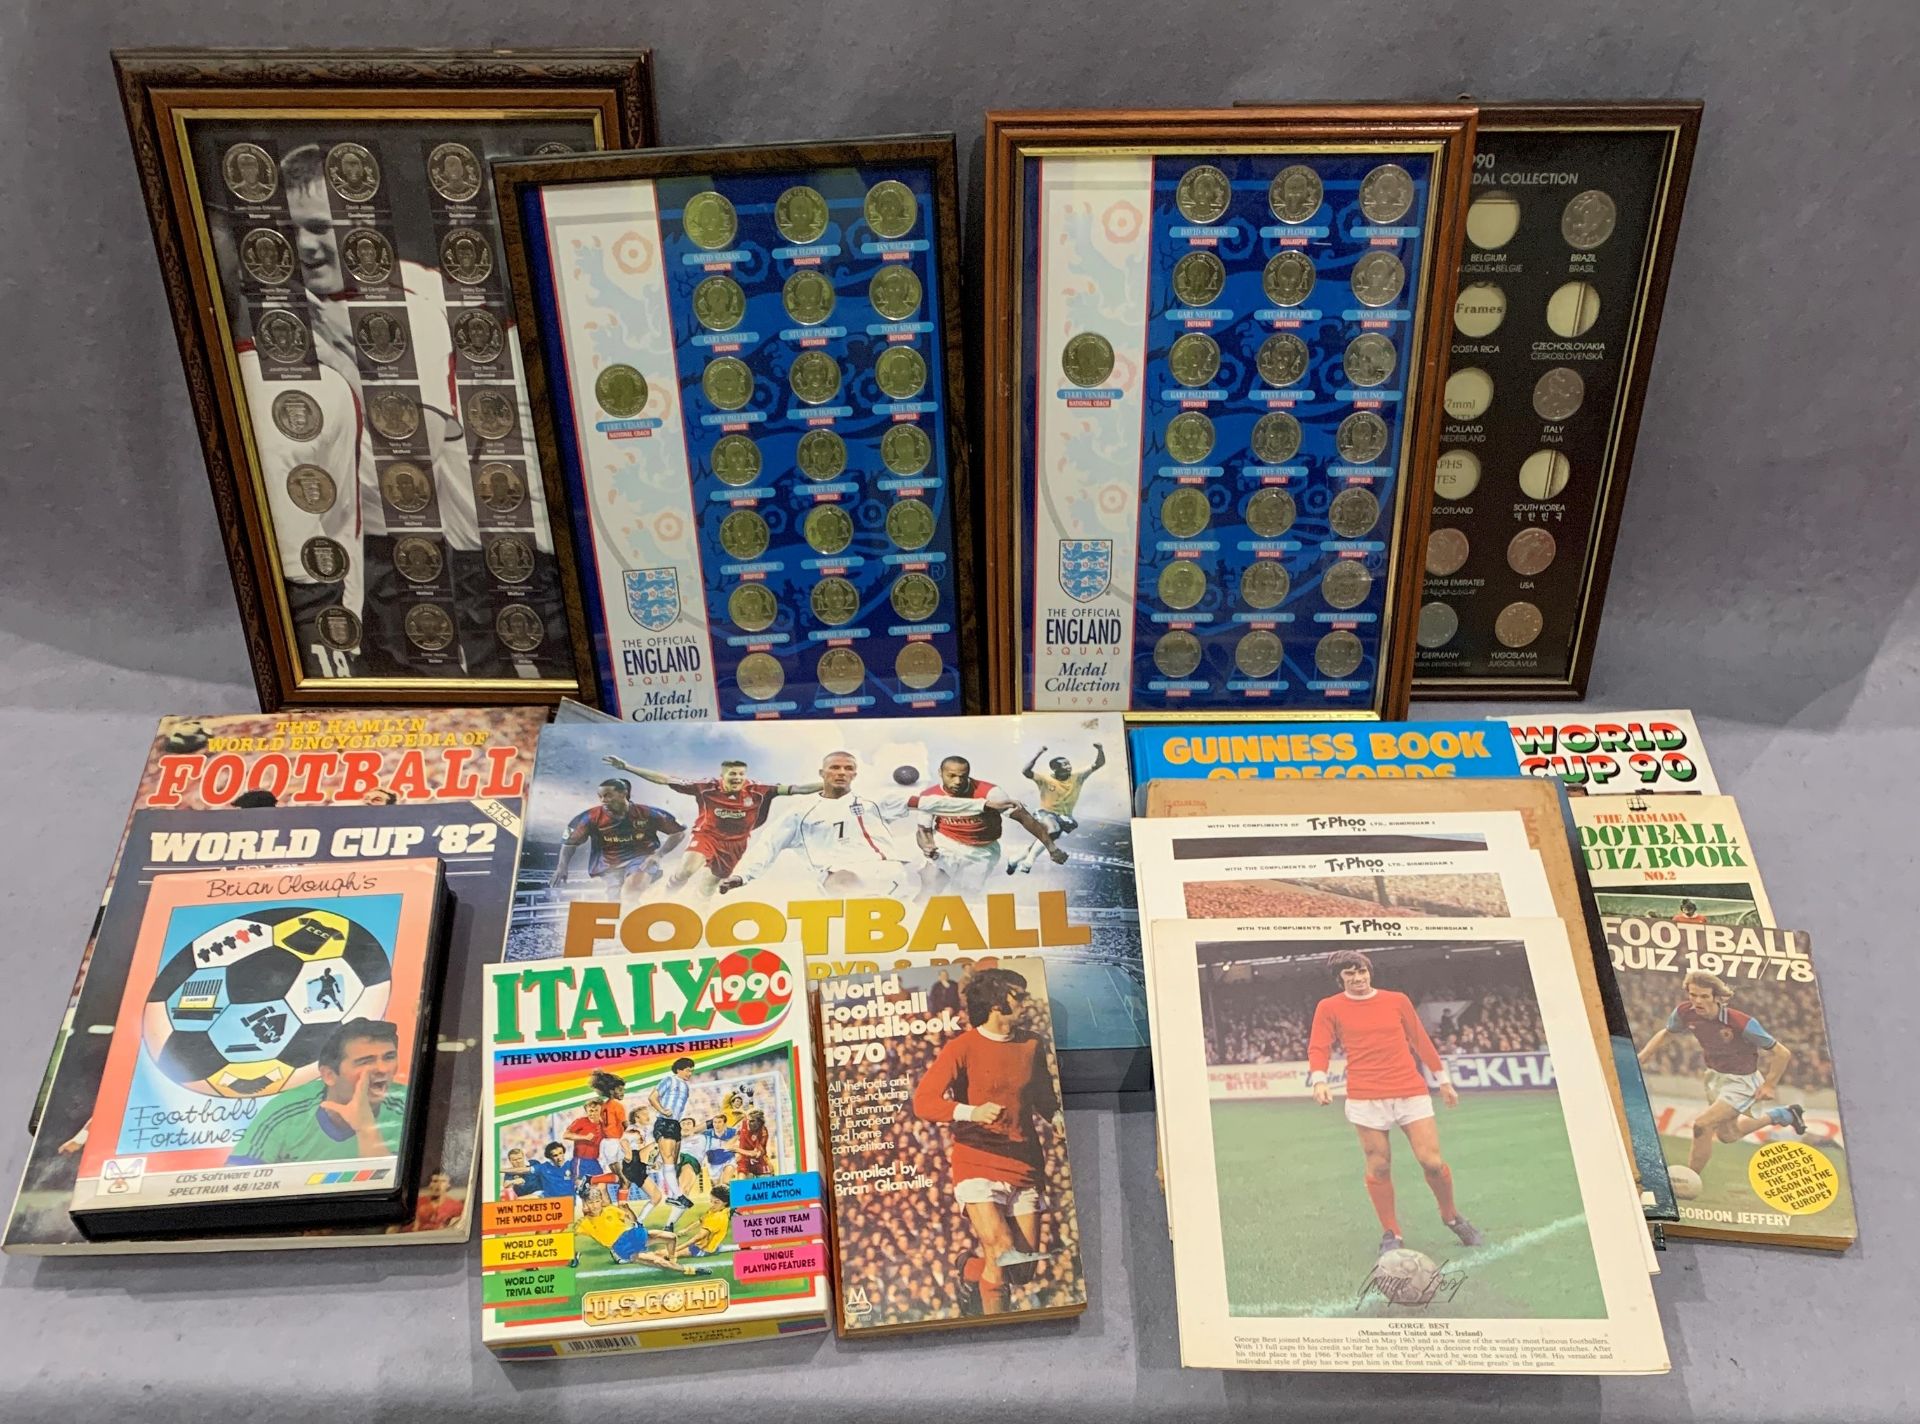 Contents to box - assorted football memorabilia including two England 1996 framed squad medal